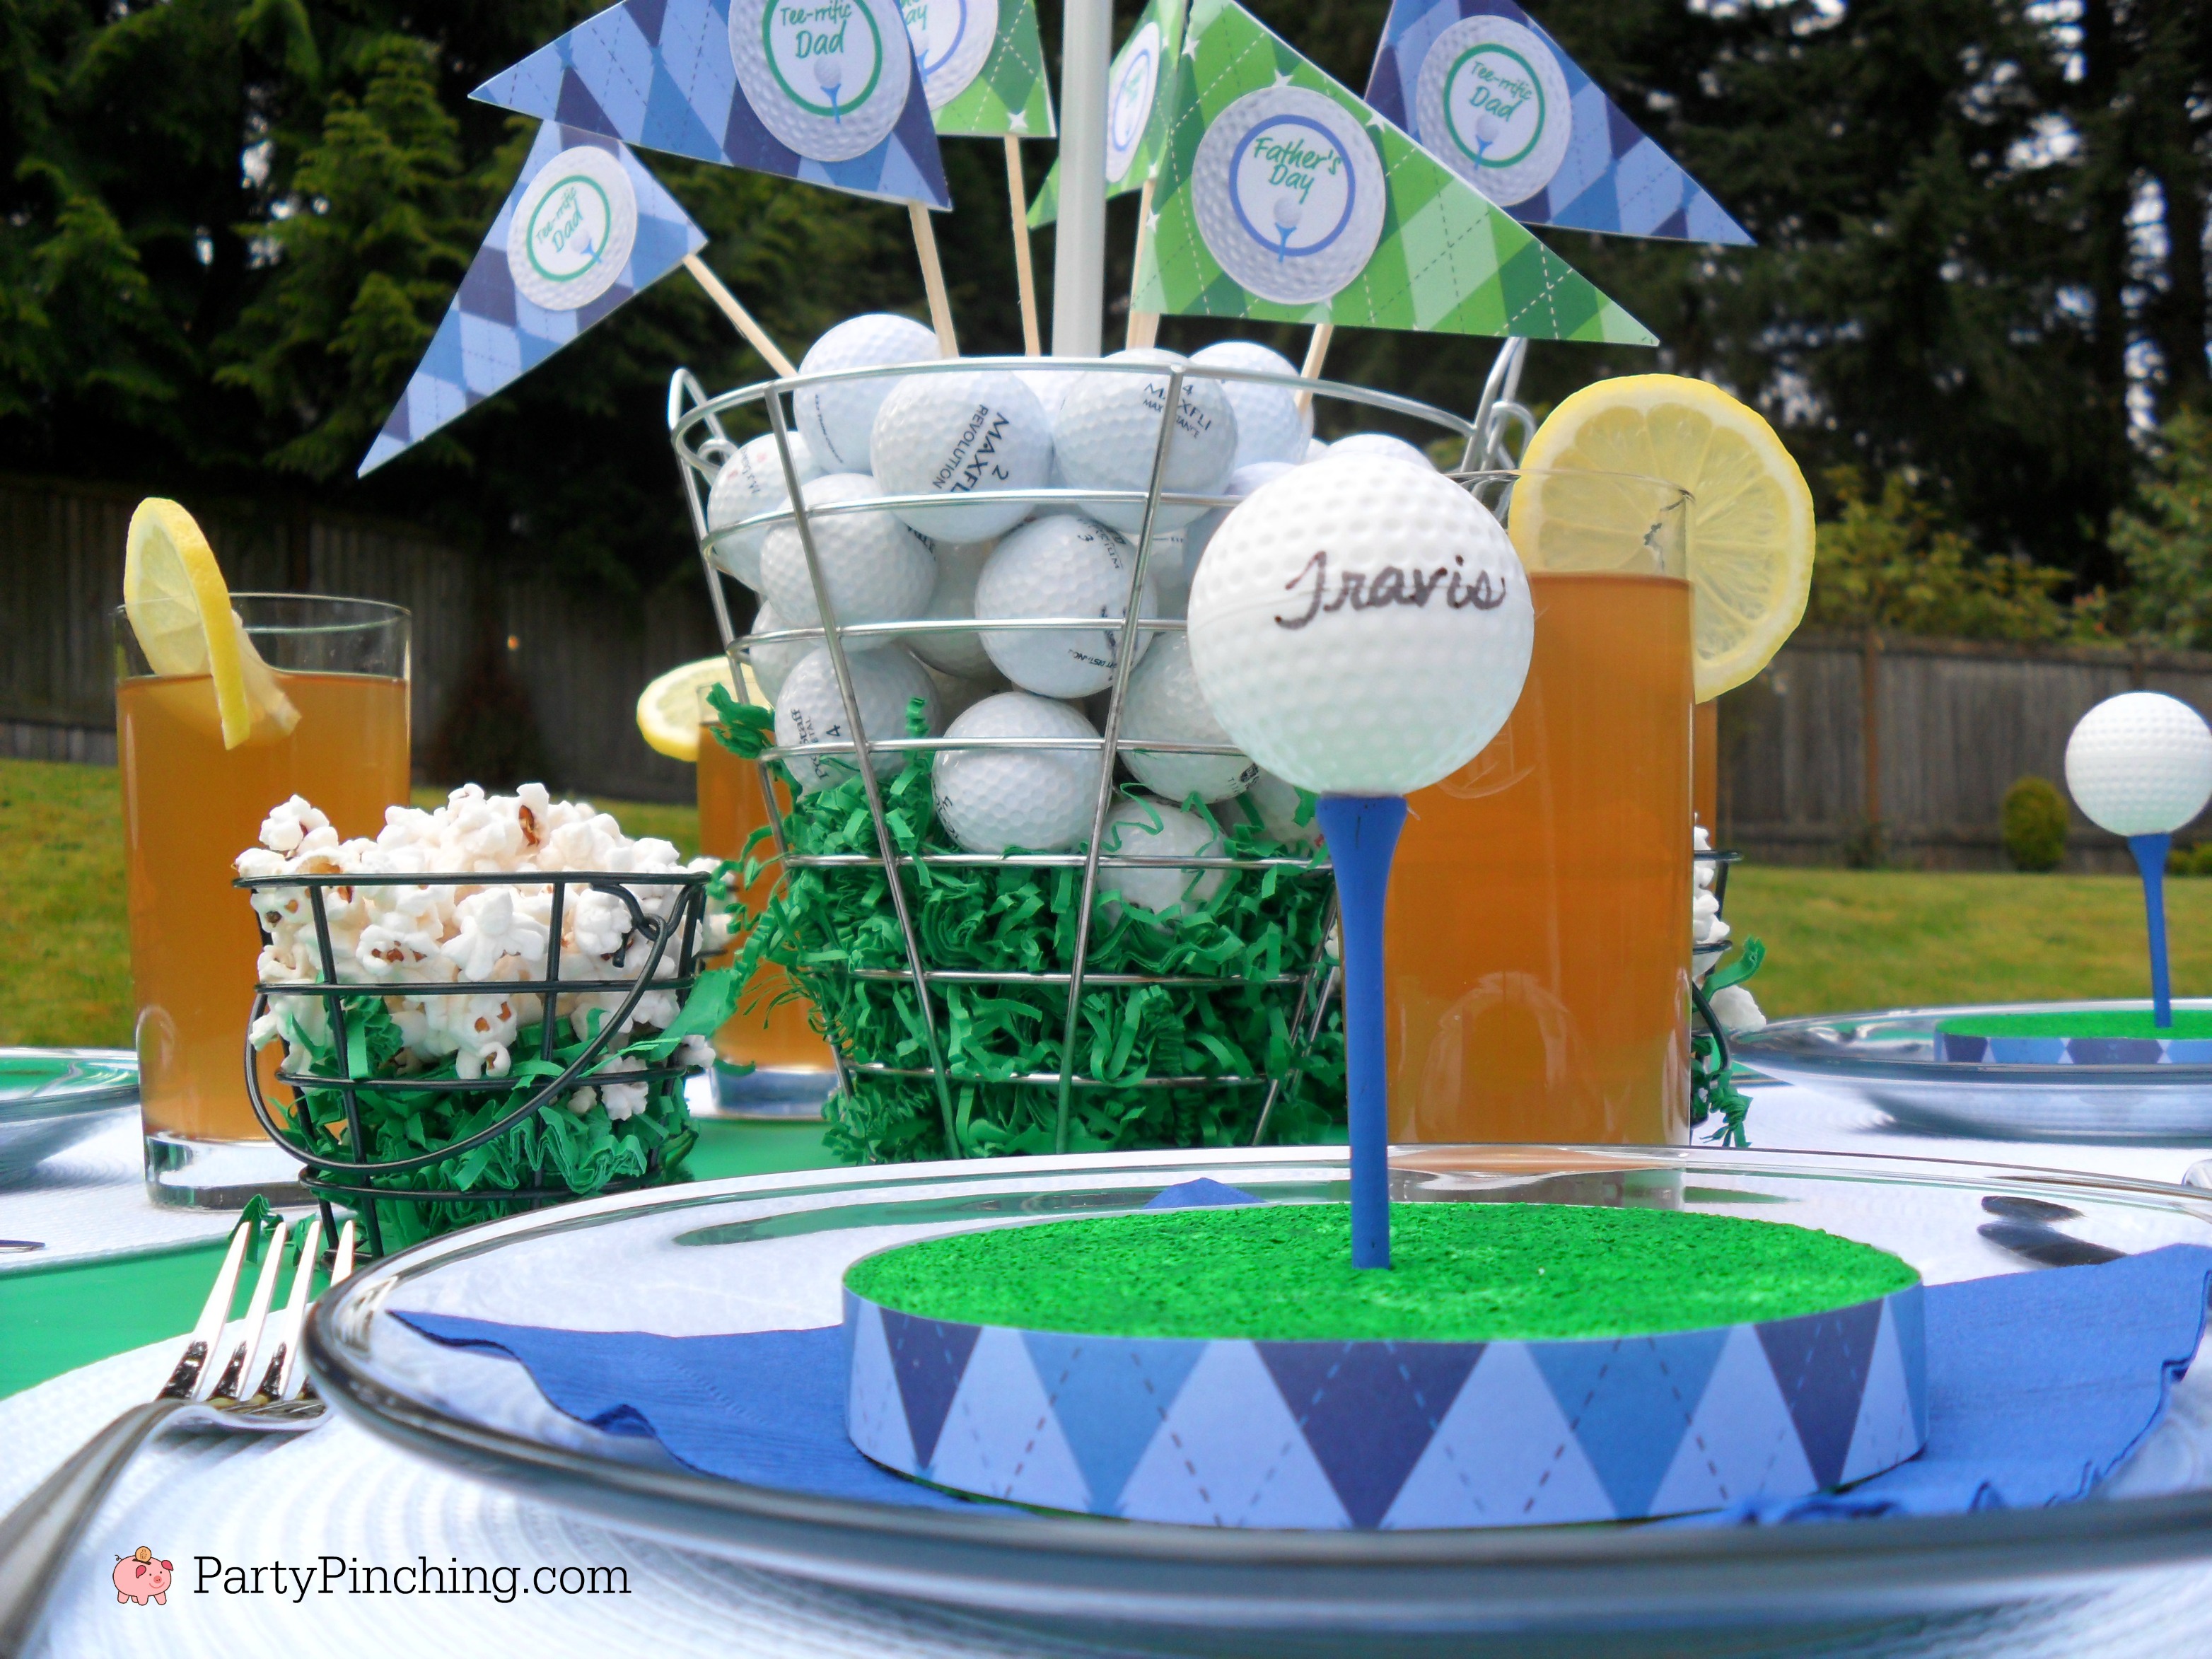 Eastern frø præambel Golf party ideas for a theme birthday or Father's Day